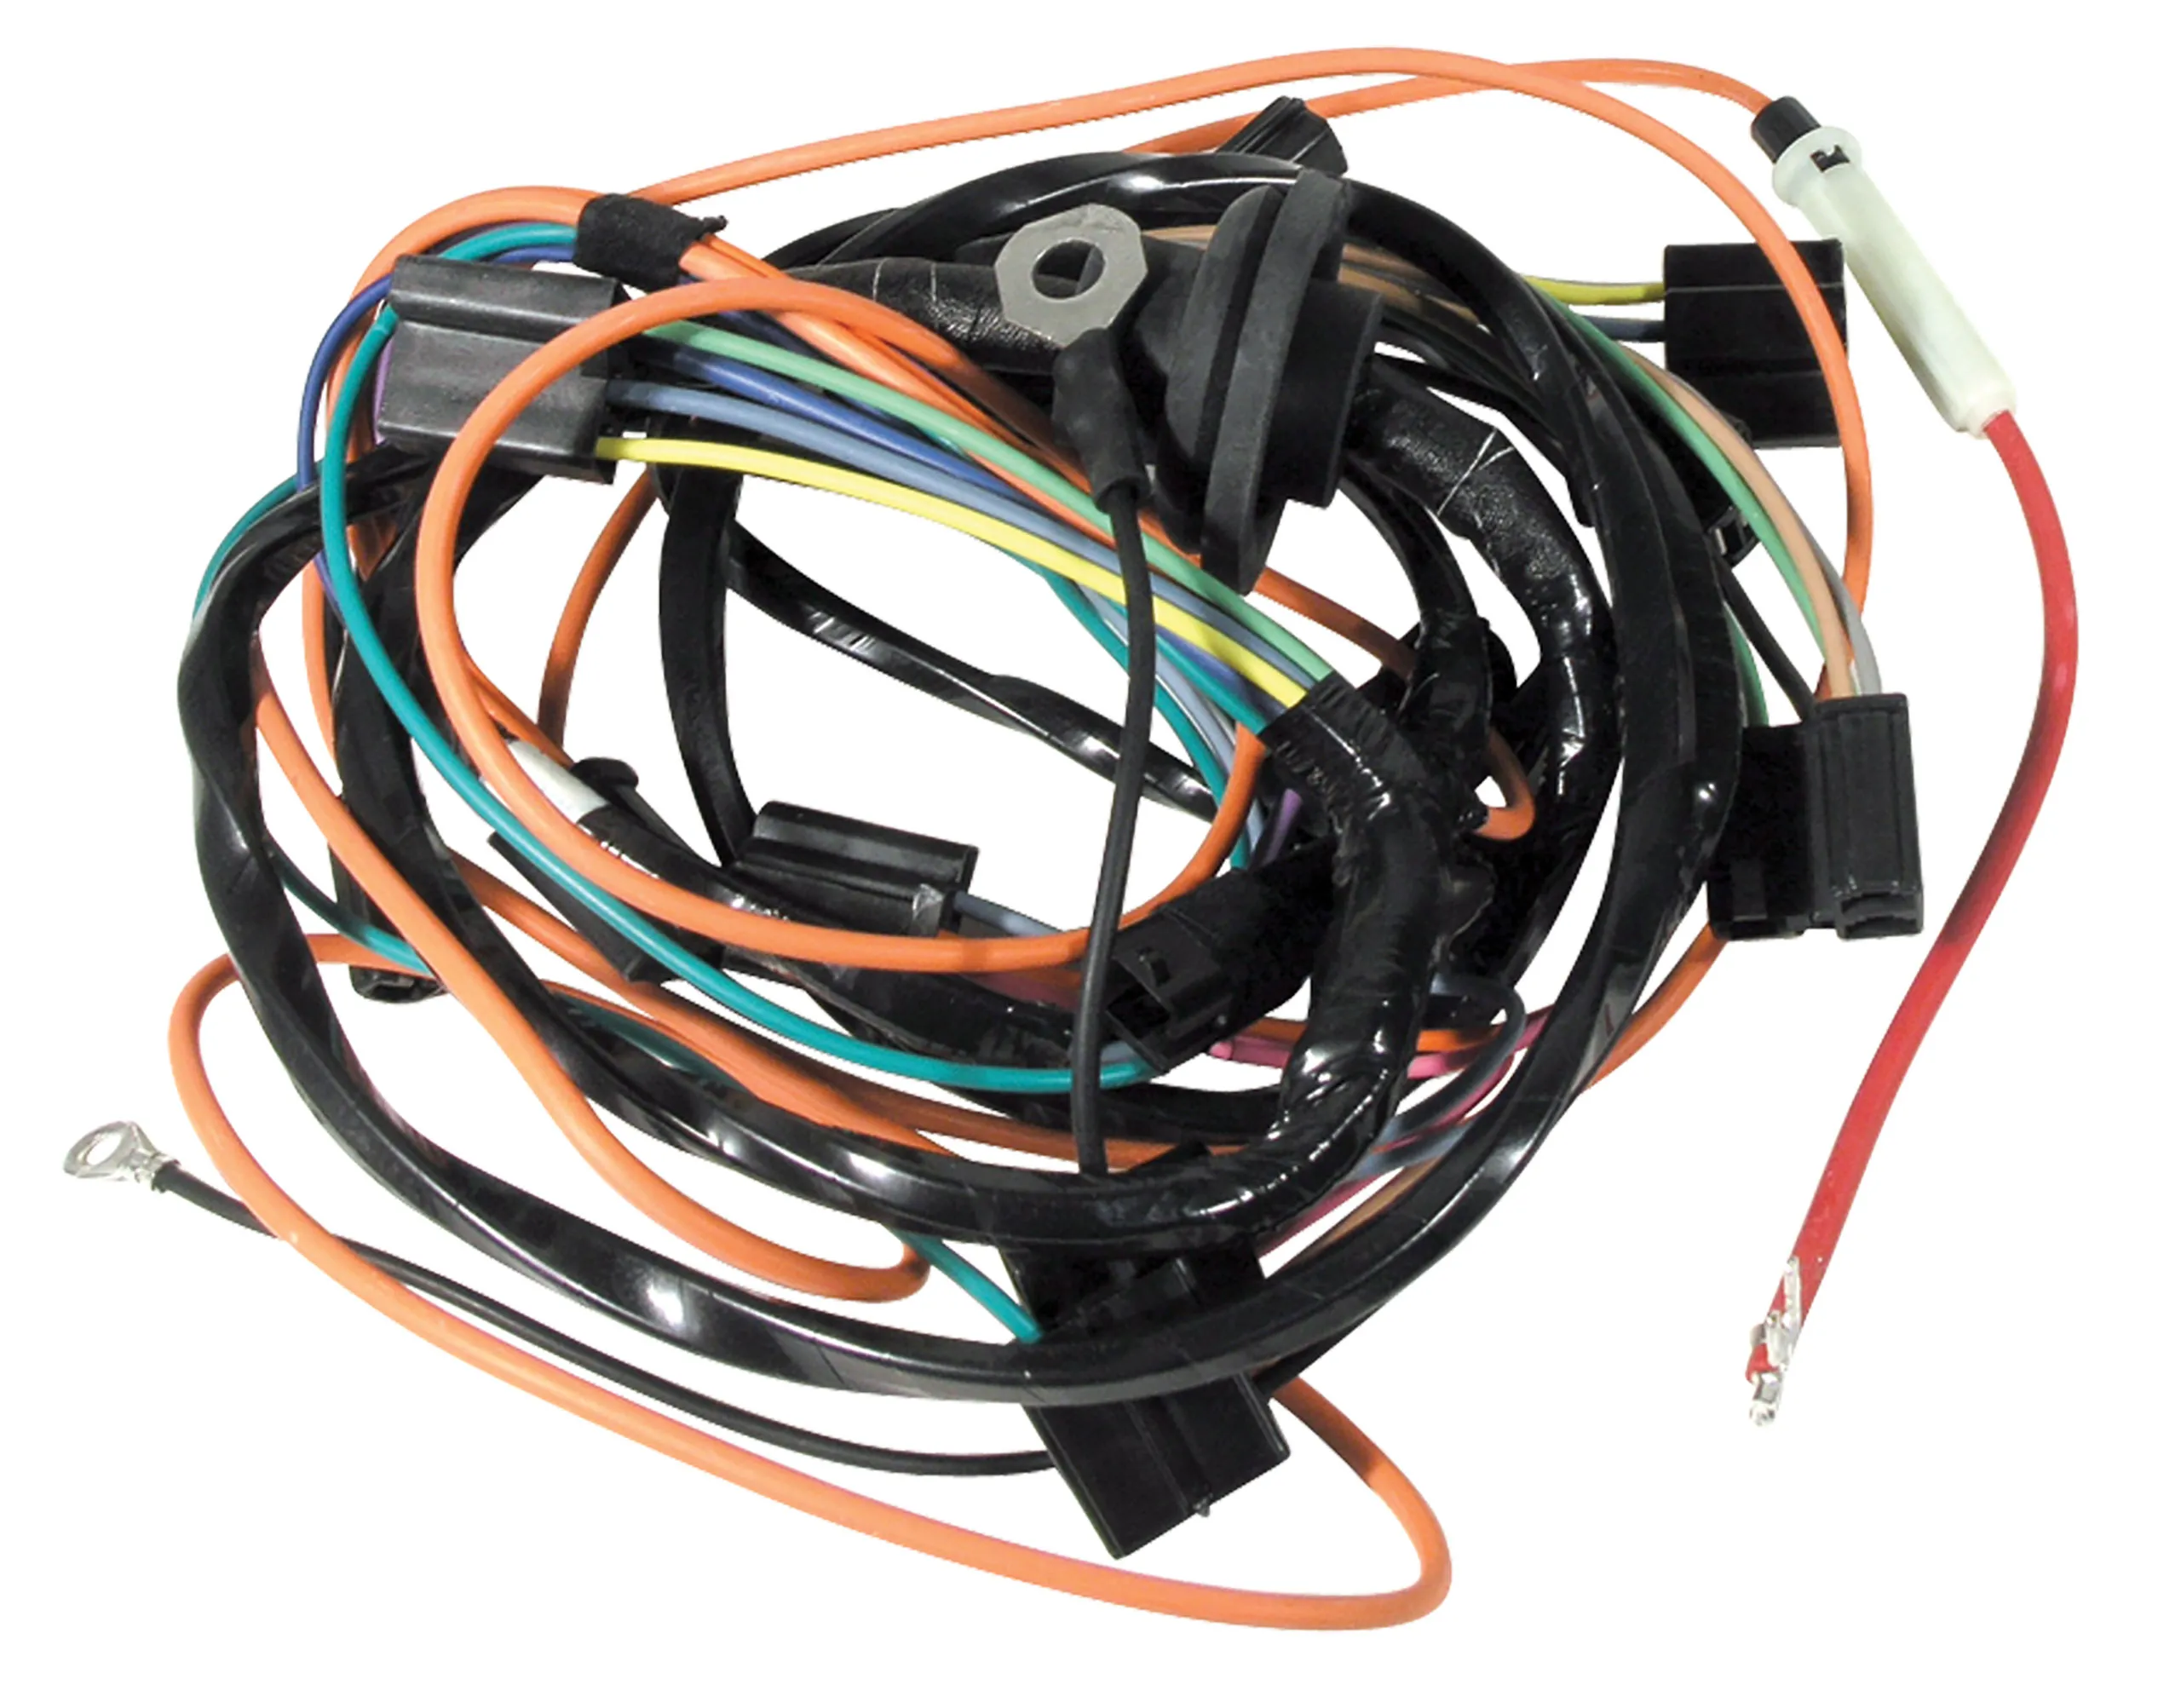 C3 1971 Chevrolet Corvette Harness. Air Conditioning W/Heater Wiring - Lectric Limited, Inc.